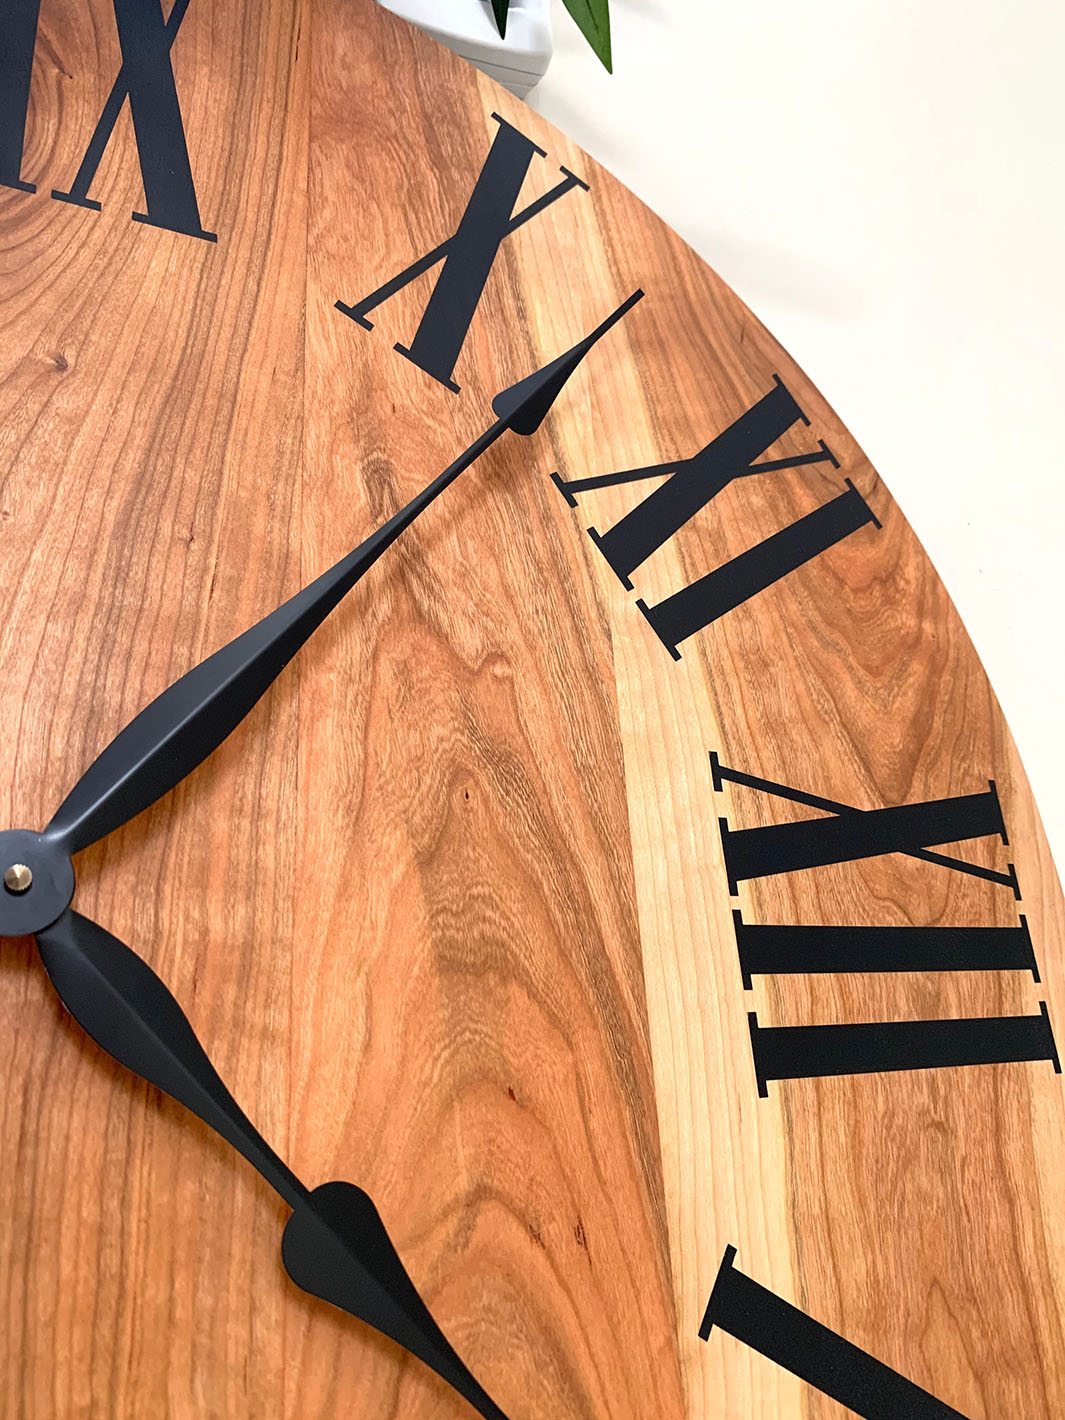 Large Sappy Cherry Hardwood Wall Clock with Black Roman Numerals Earthly Comfort Clocks 1524-3